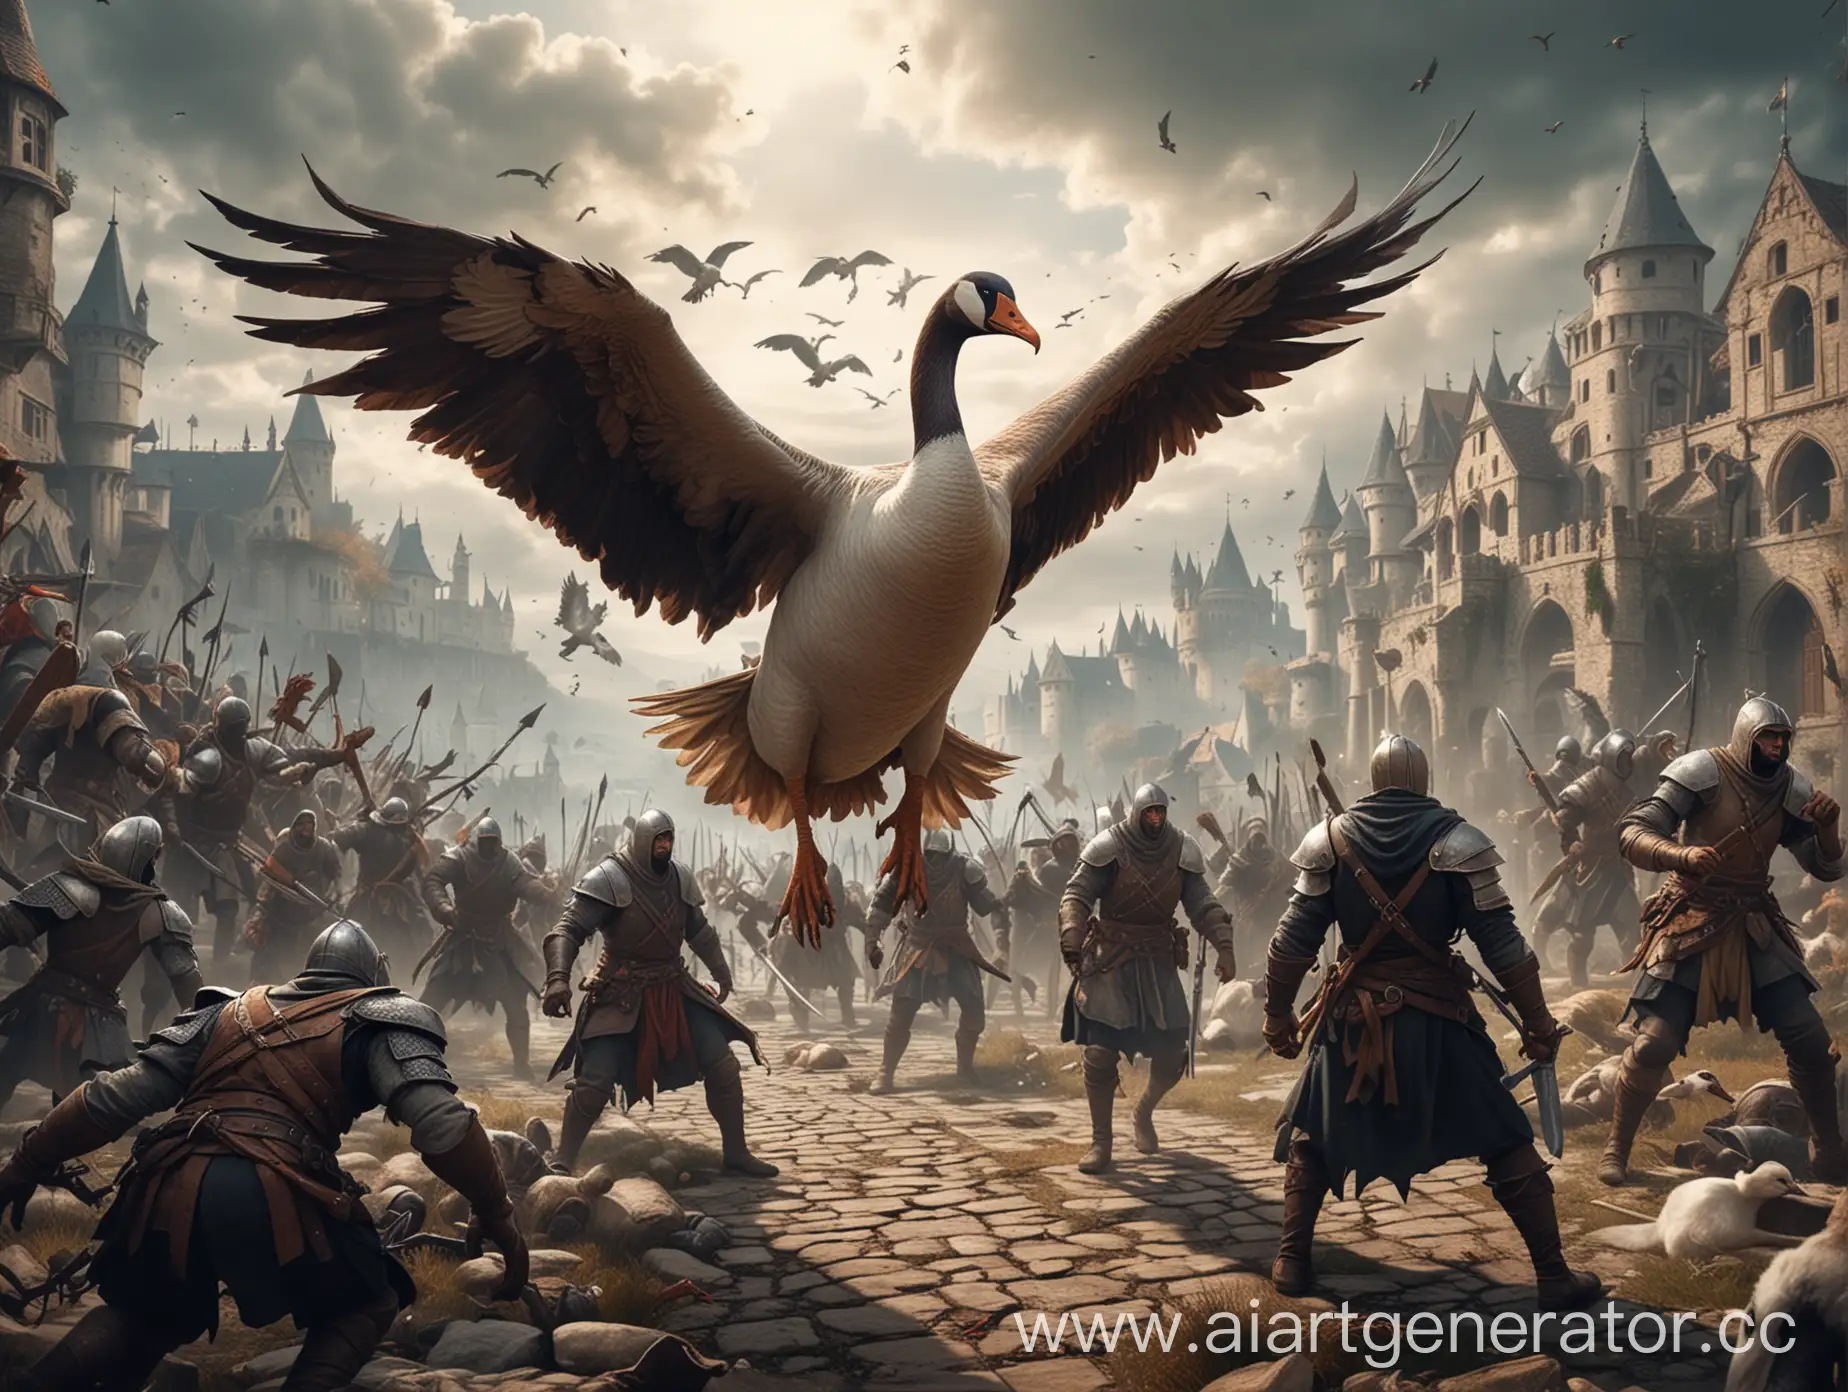 Epic-Fantasy-Game-Heroes-Battling-a-Monstrous-ManyHeaded-Goose